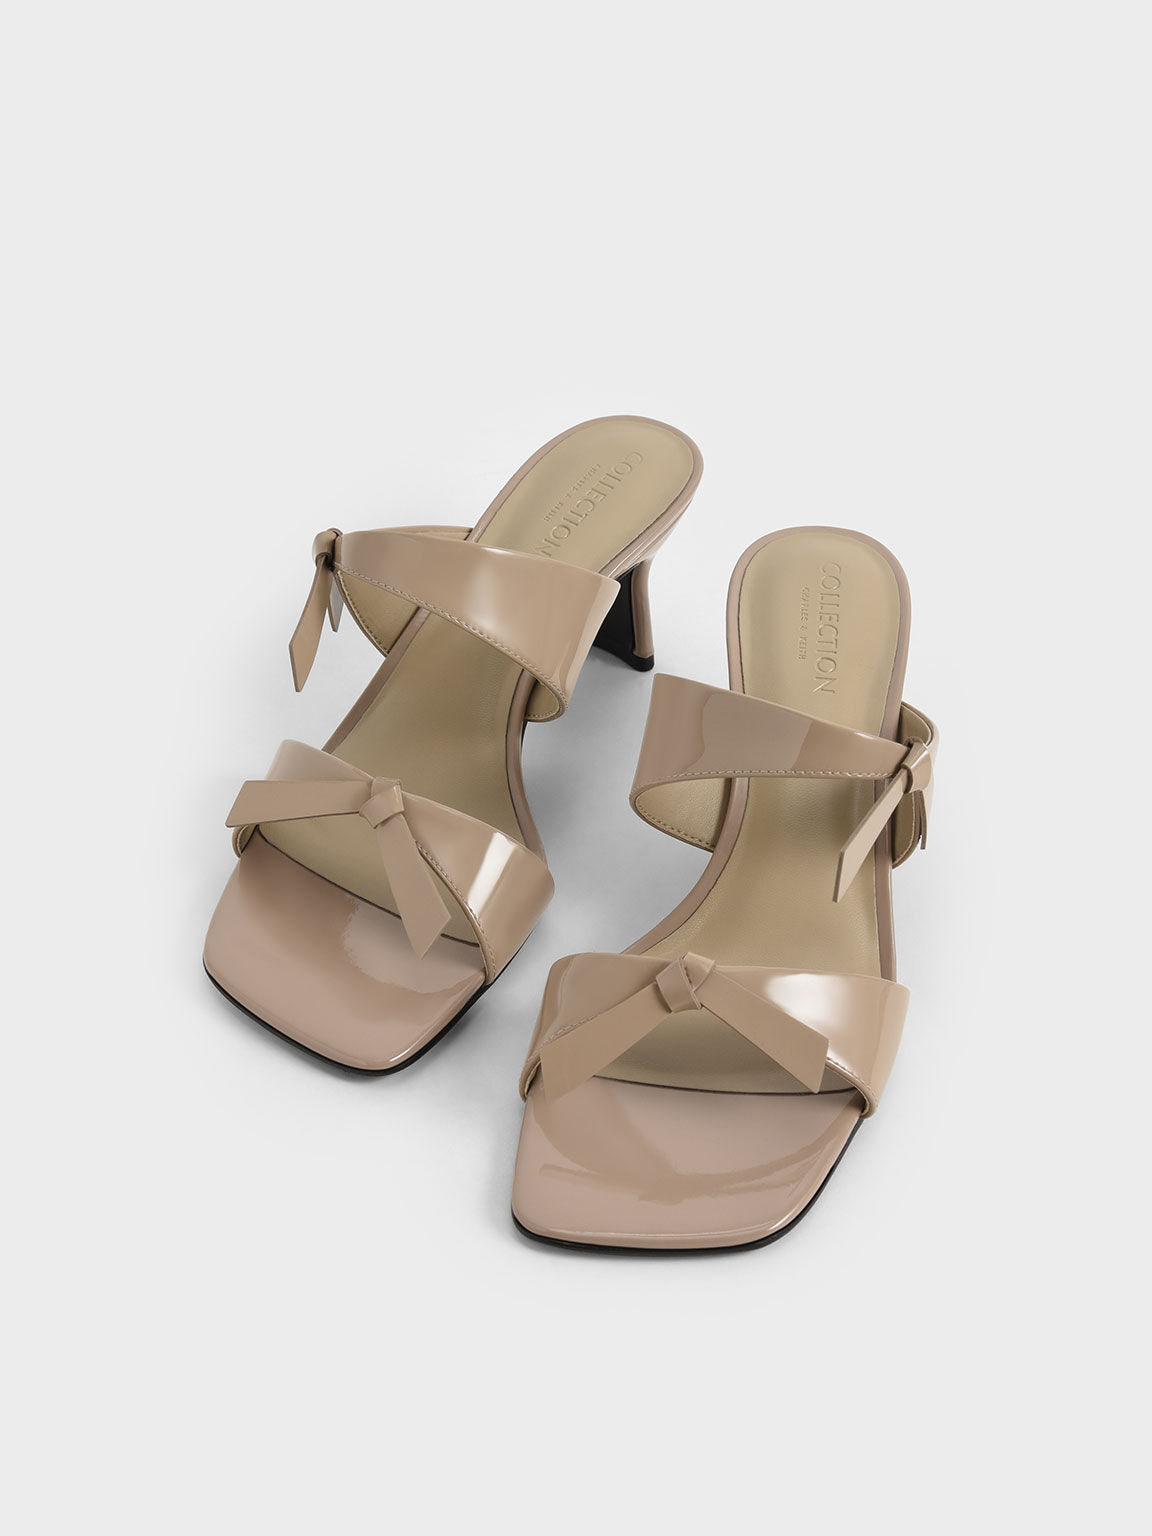 Patent Leather Bow-Tie Blade Heel Mules, Taupe, hi-res